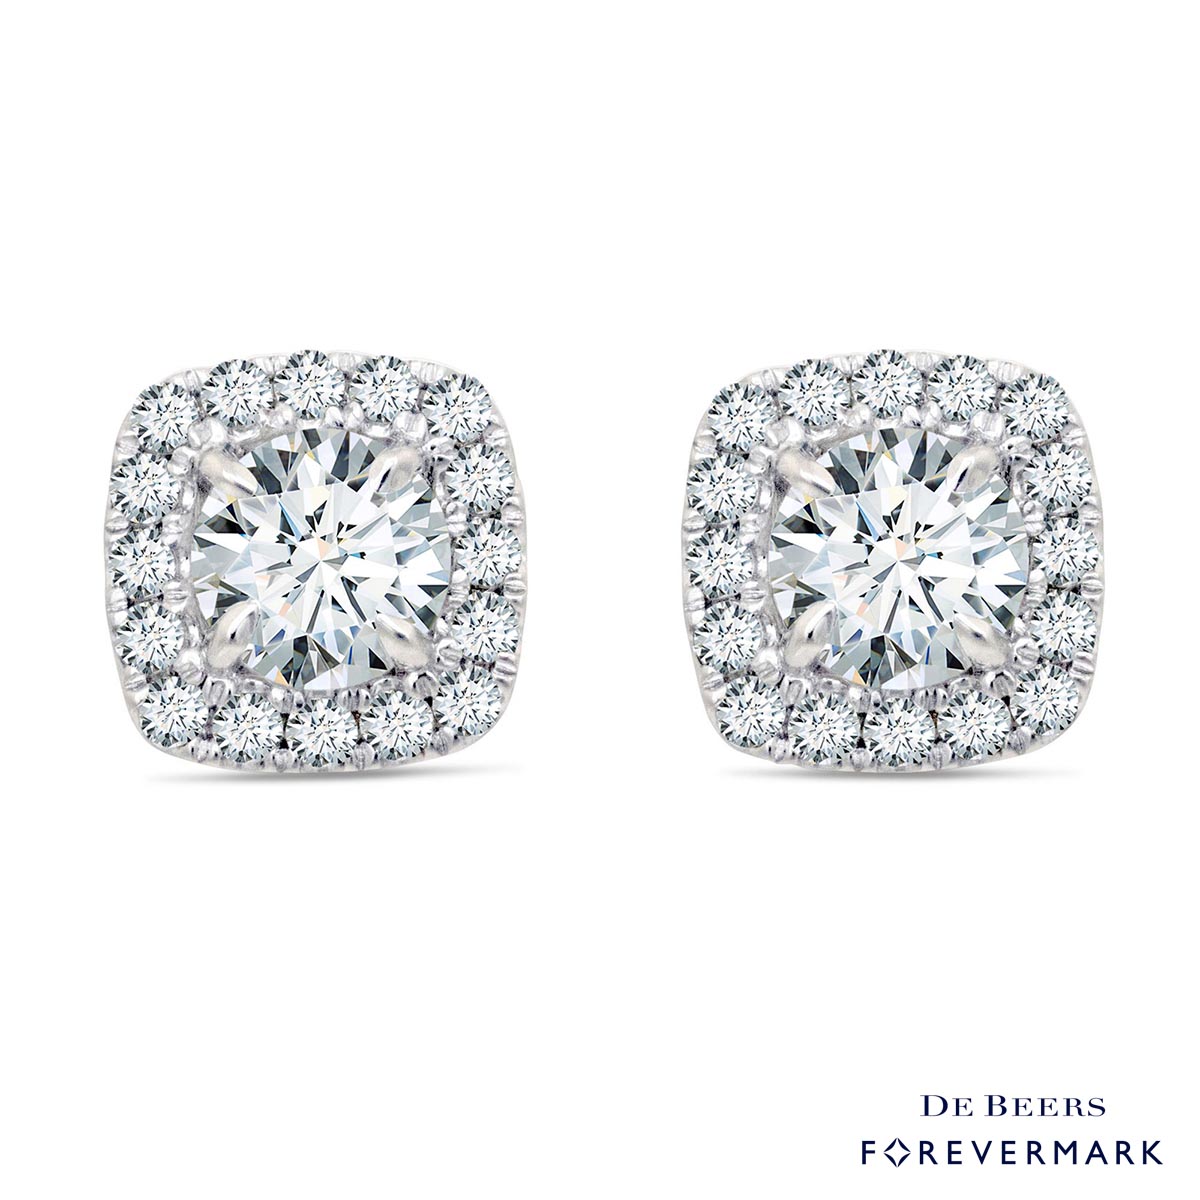 De Beers Forevermark Diamond Cushion Halo Earrings in 18kt White Gold (1ct tw)